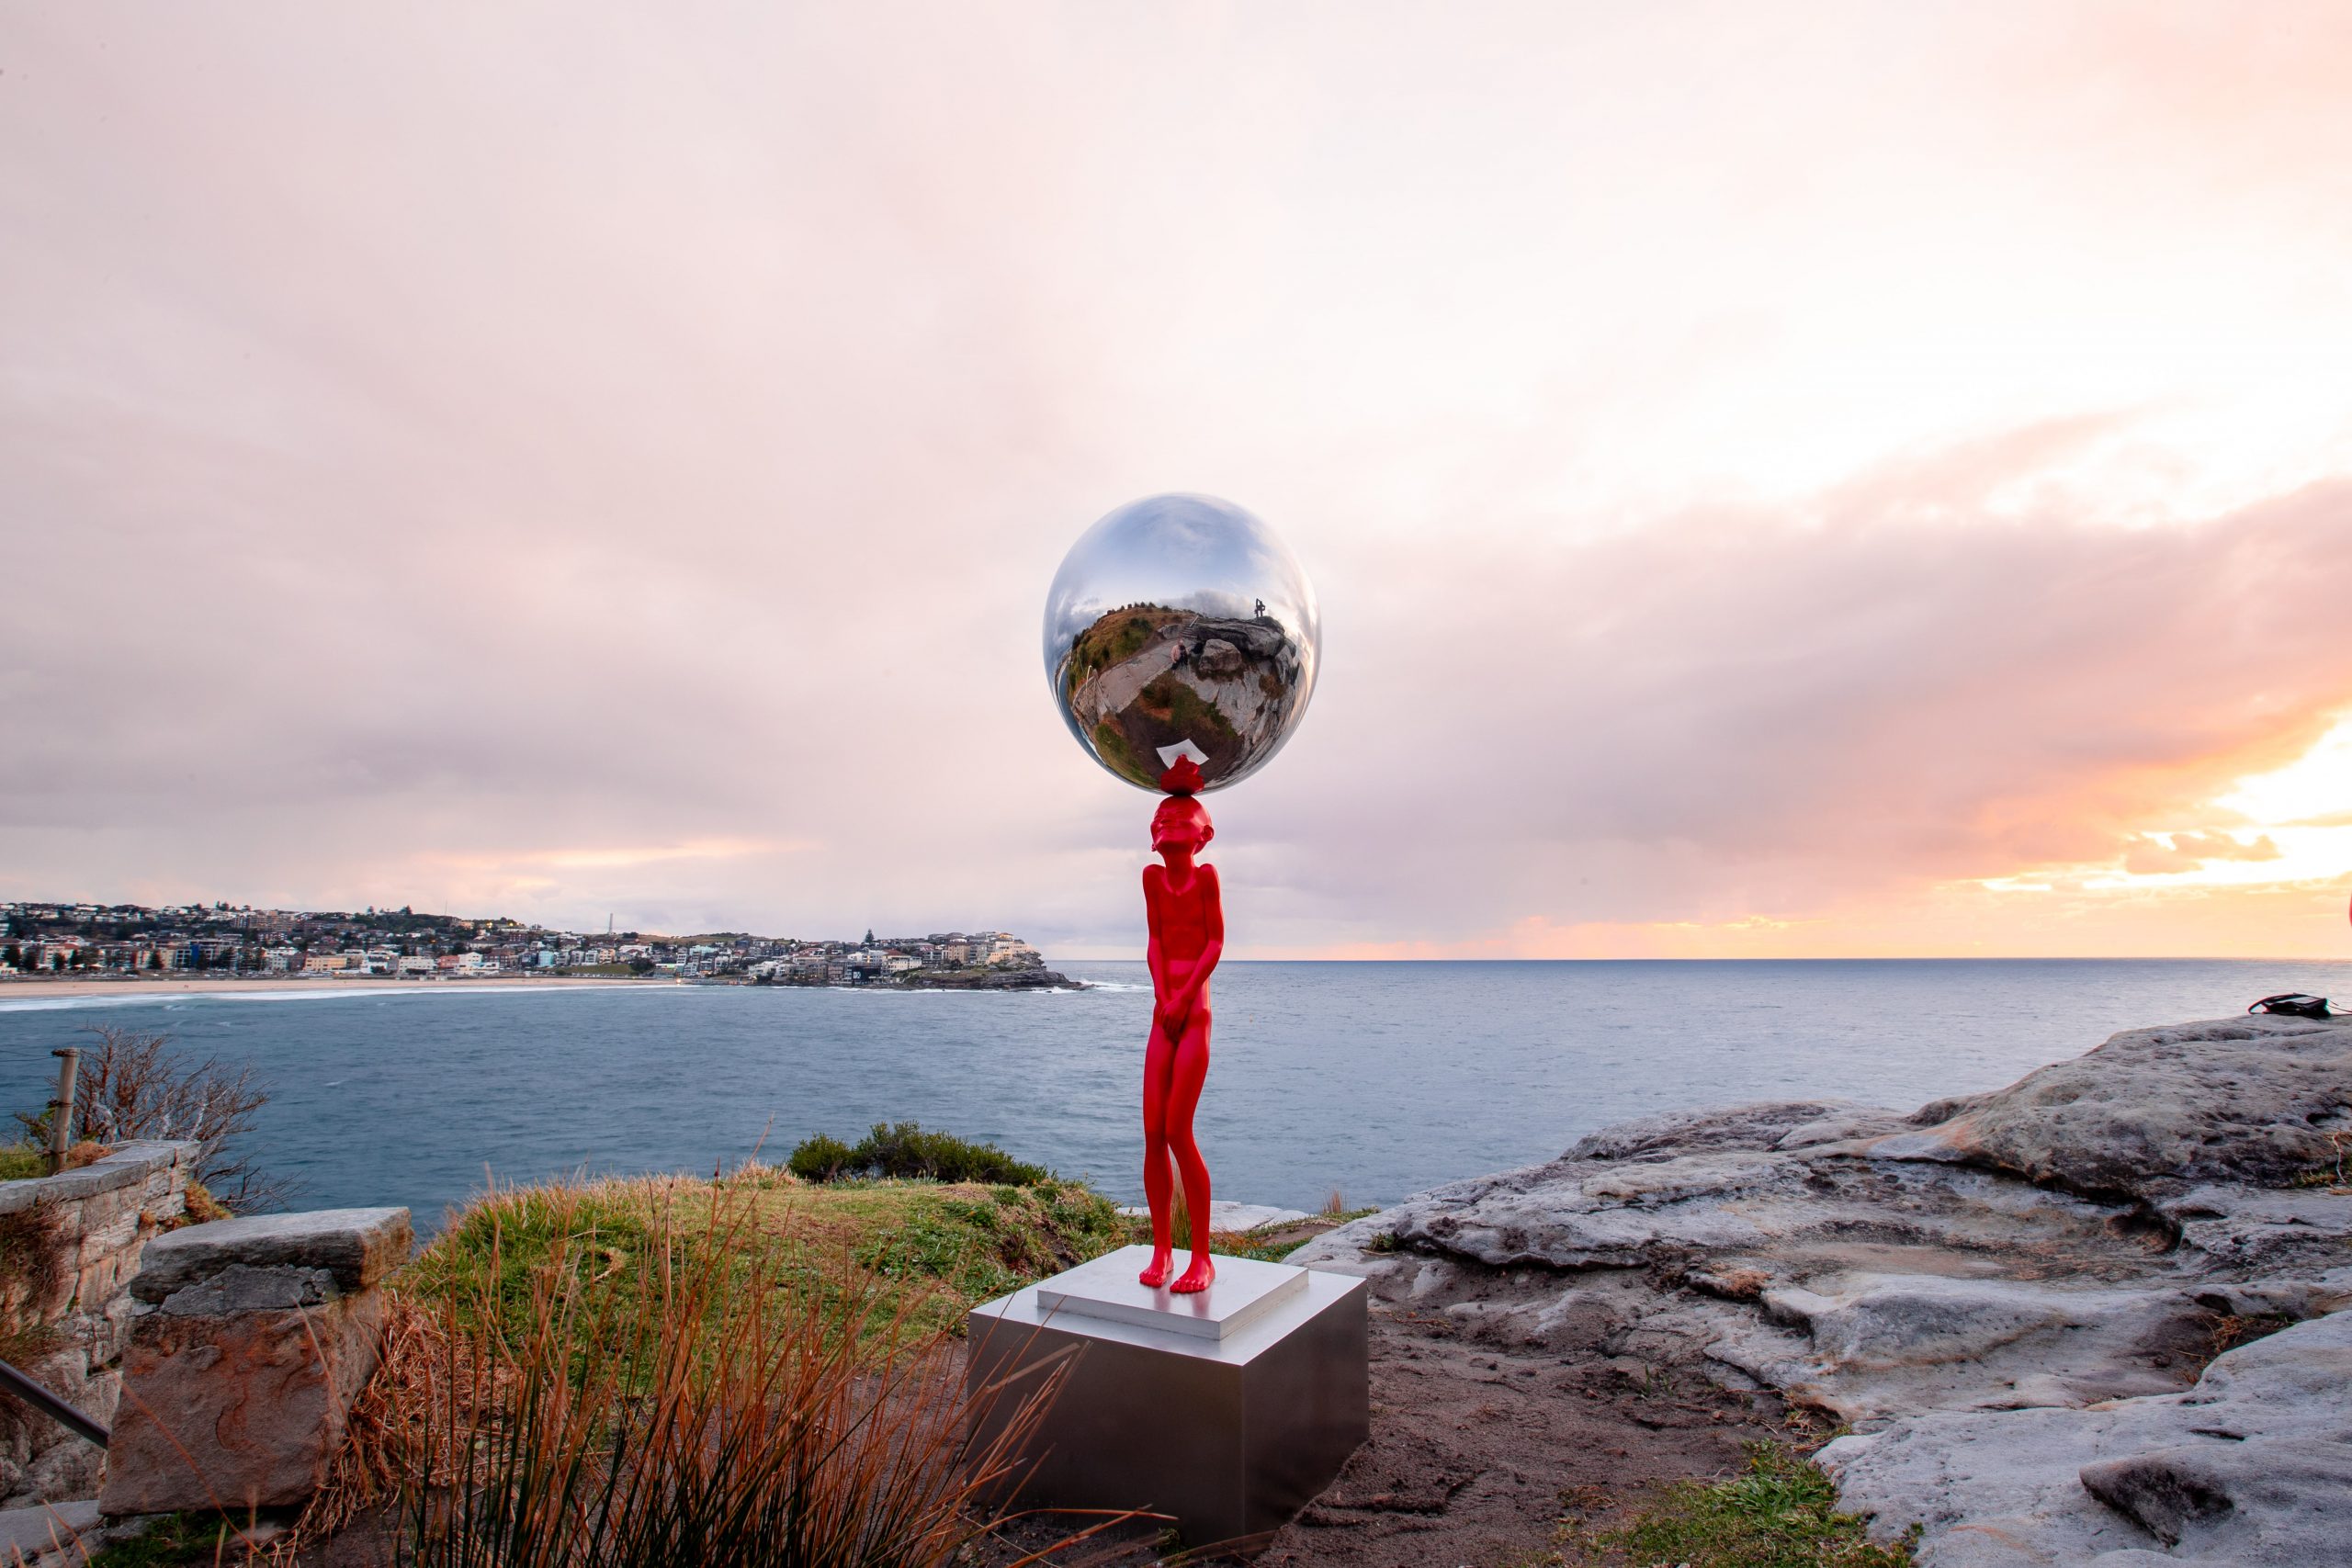 Aqualand_Chen Wenling, 'The Top Of The Balance', Sculpture by the Sea, Bondi 2023, Photo: Charlotte Curd